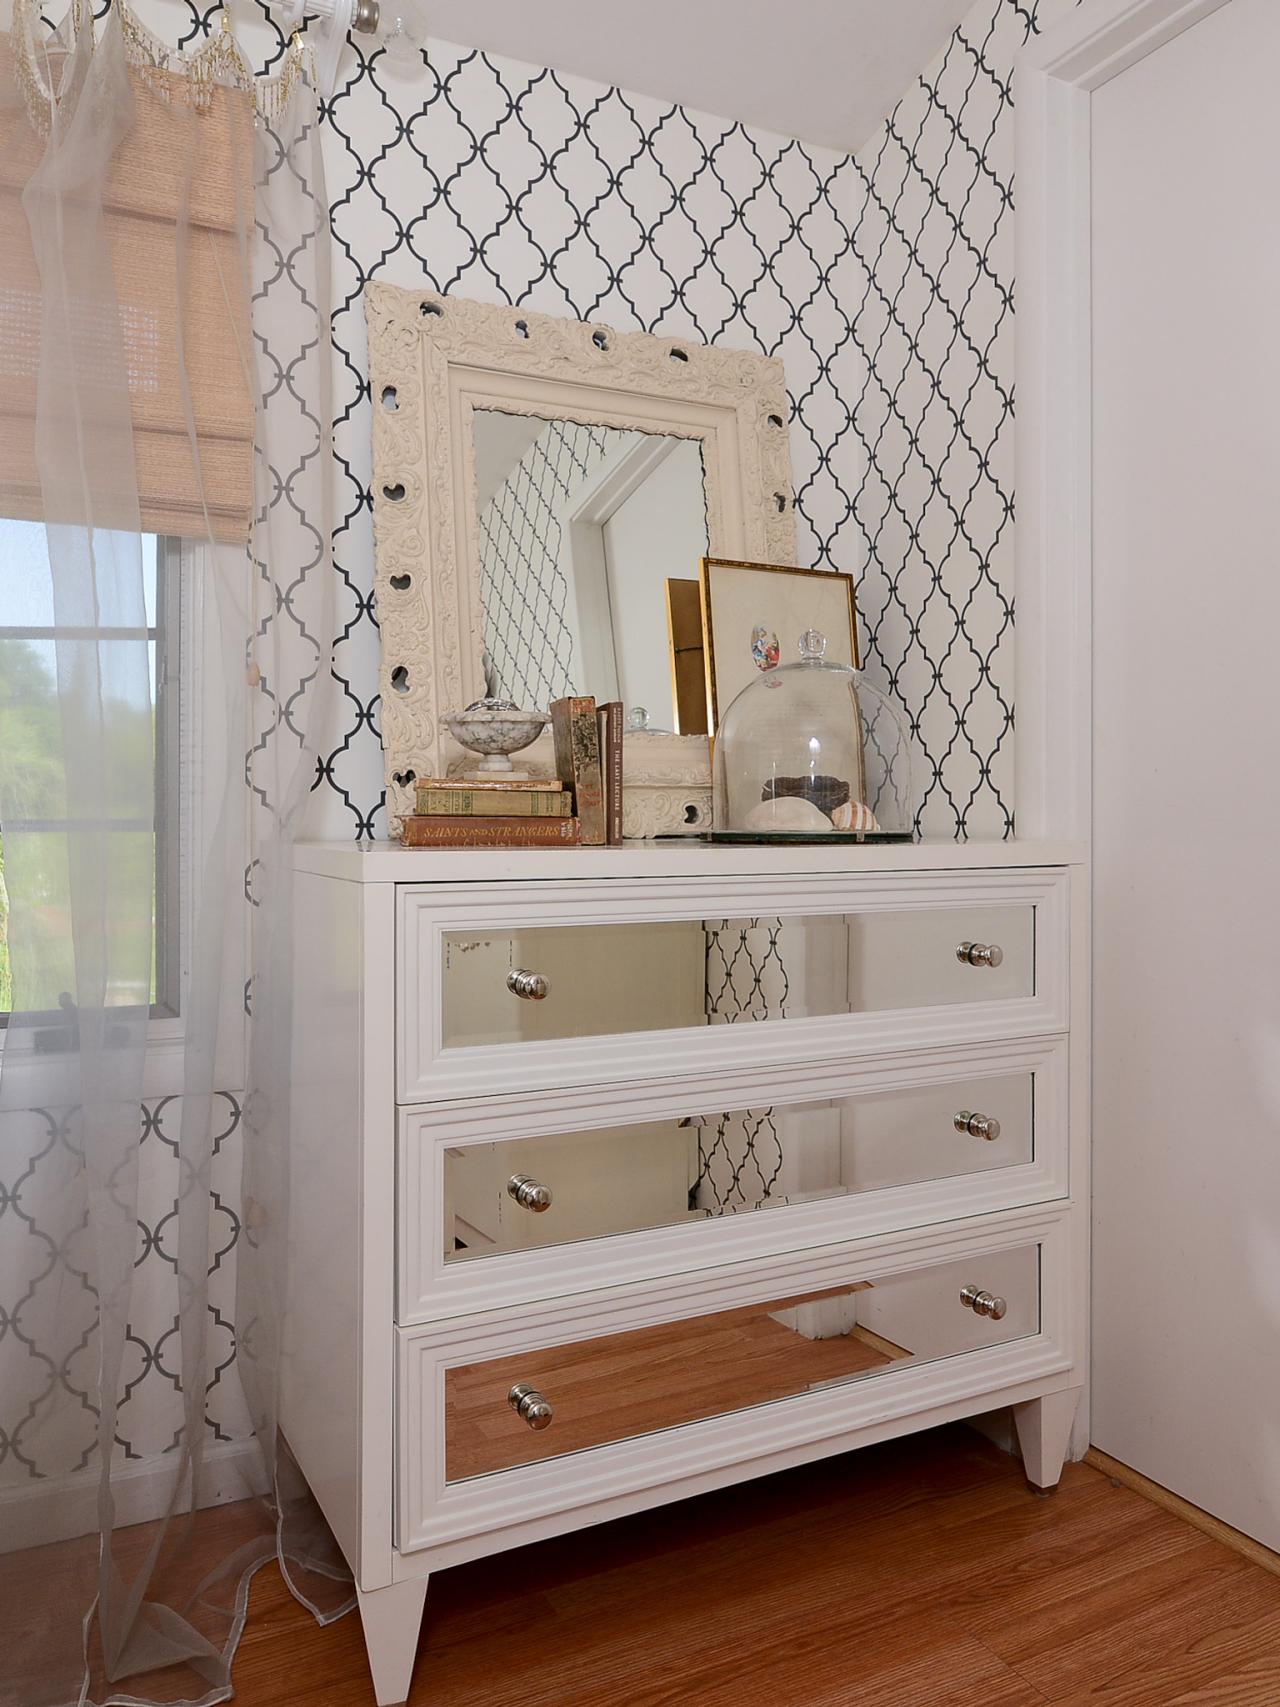 Trellis Wallpaper and Mirrored Dresser in Cottage-Style Bedroom | HGTV